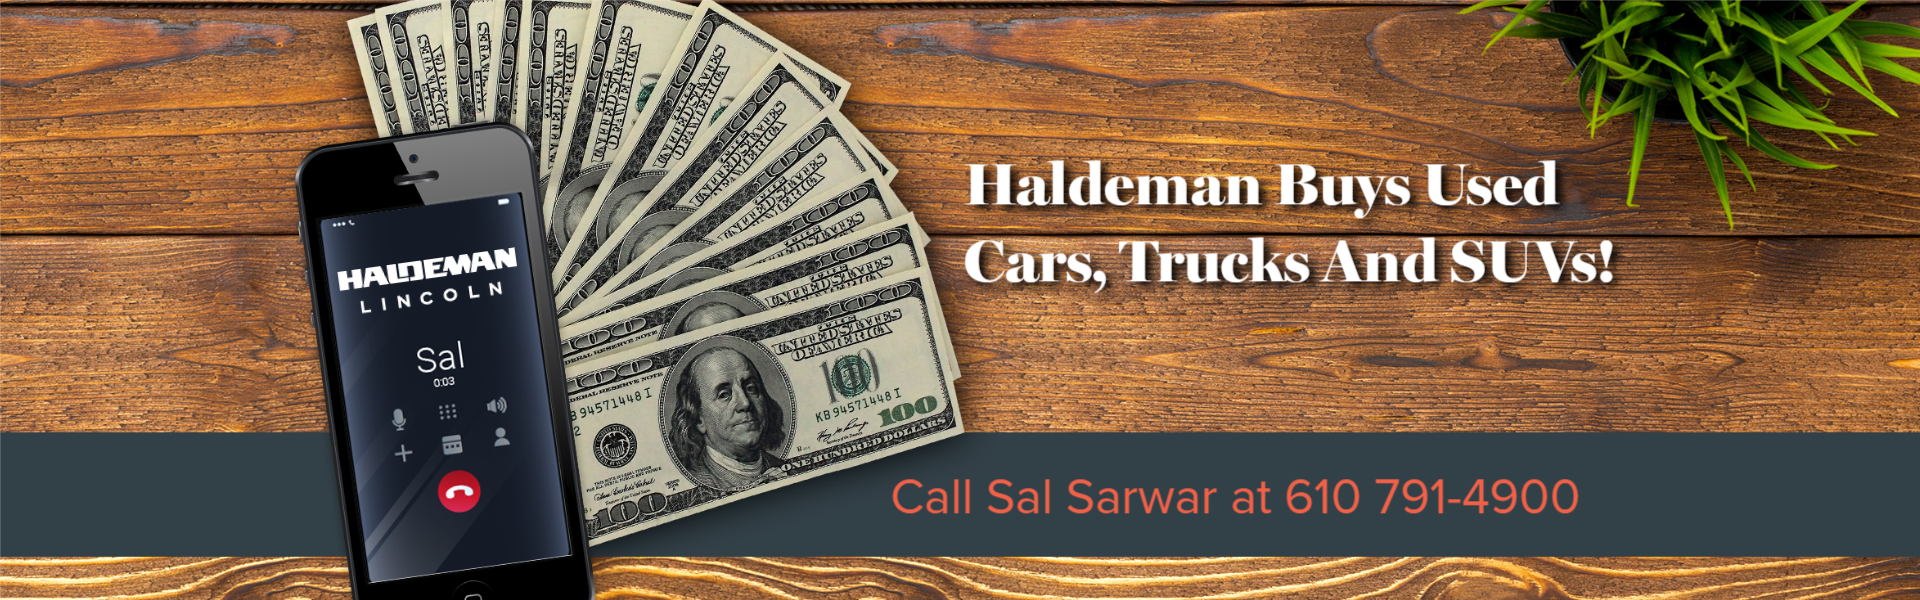 Haldeman Lincoln in Allentown buys pre-owned vehicles!